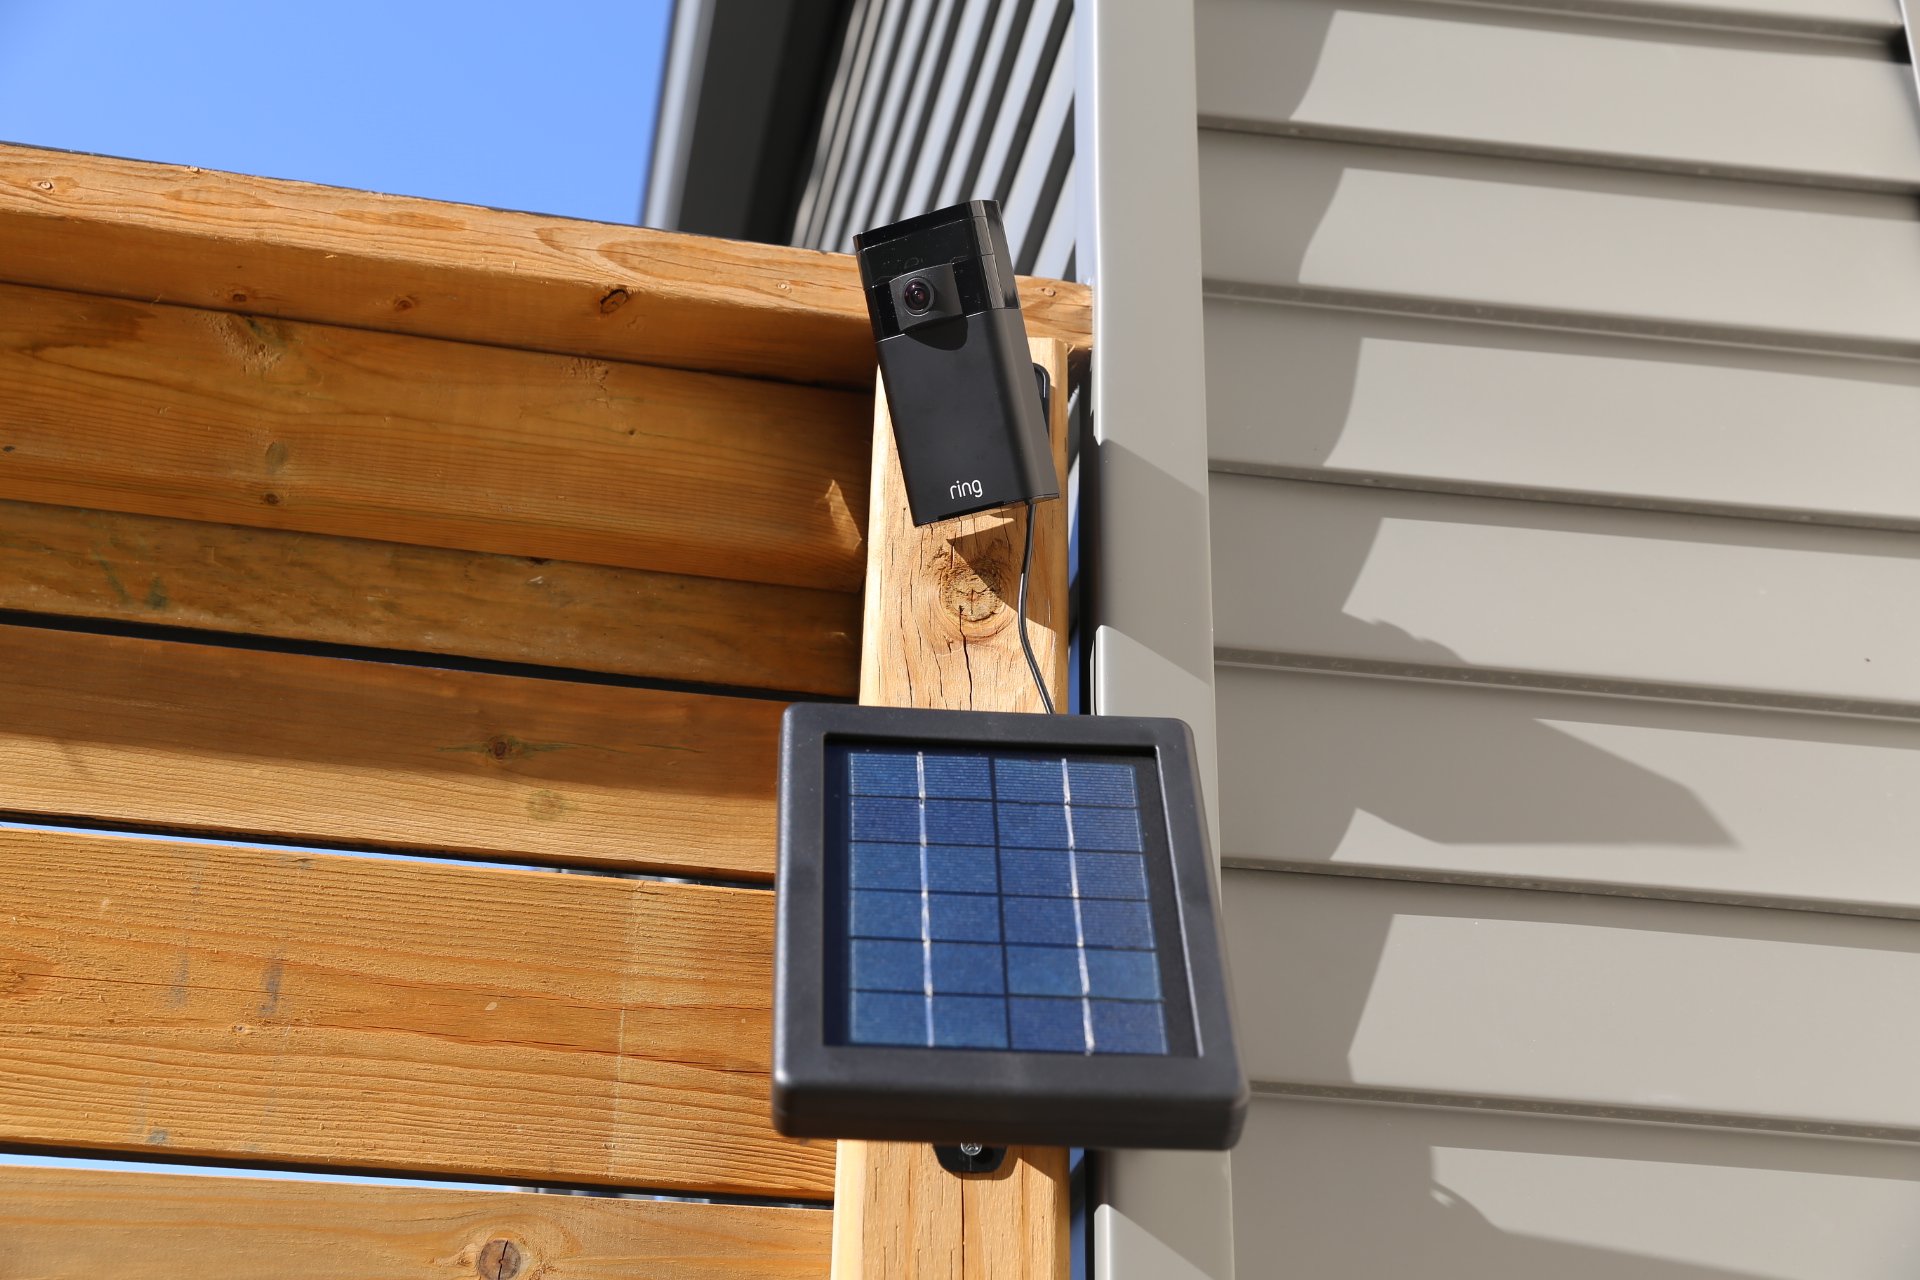 Ring Stick Up Cam and Solar Panel combo provides peace of mind TechCrunch